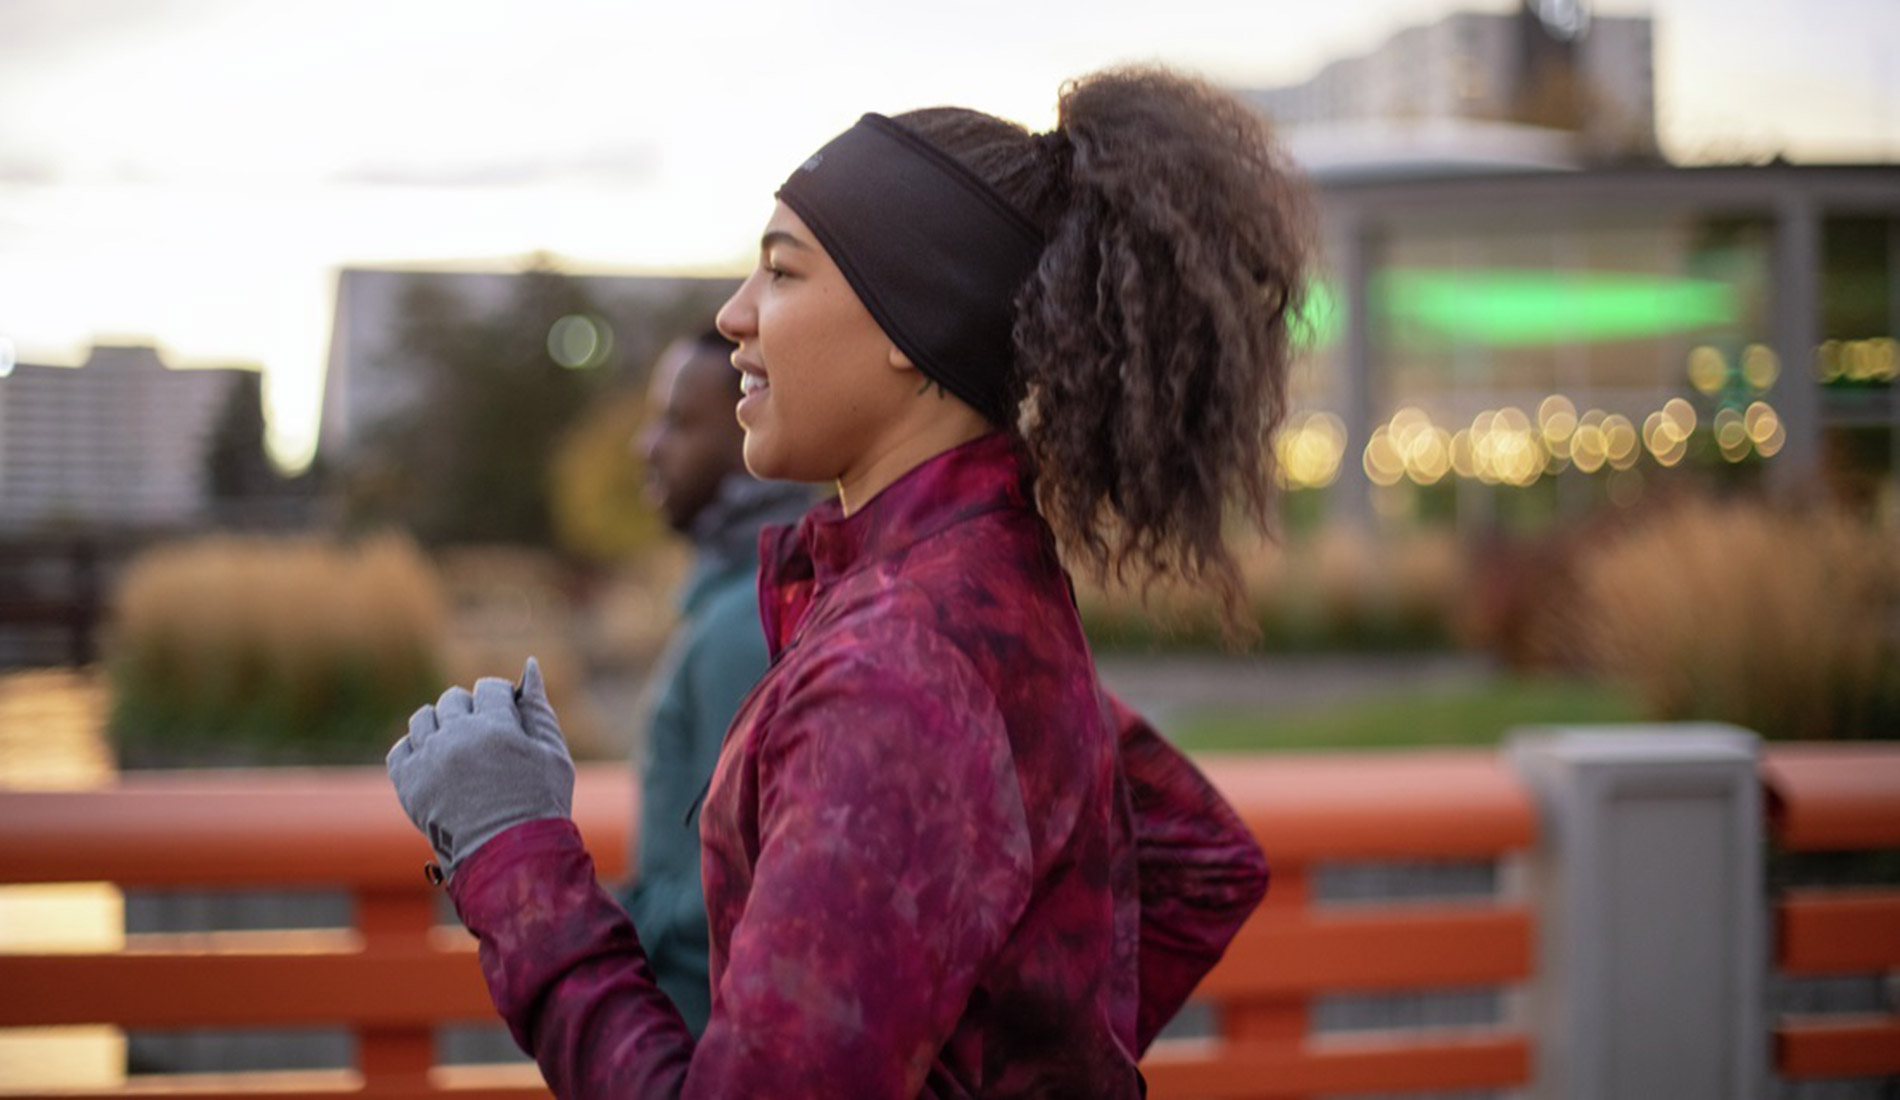 A young woman is dressed for cold weather as she runs outside in an urban environment.